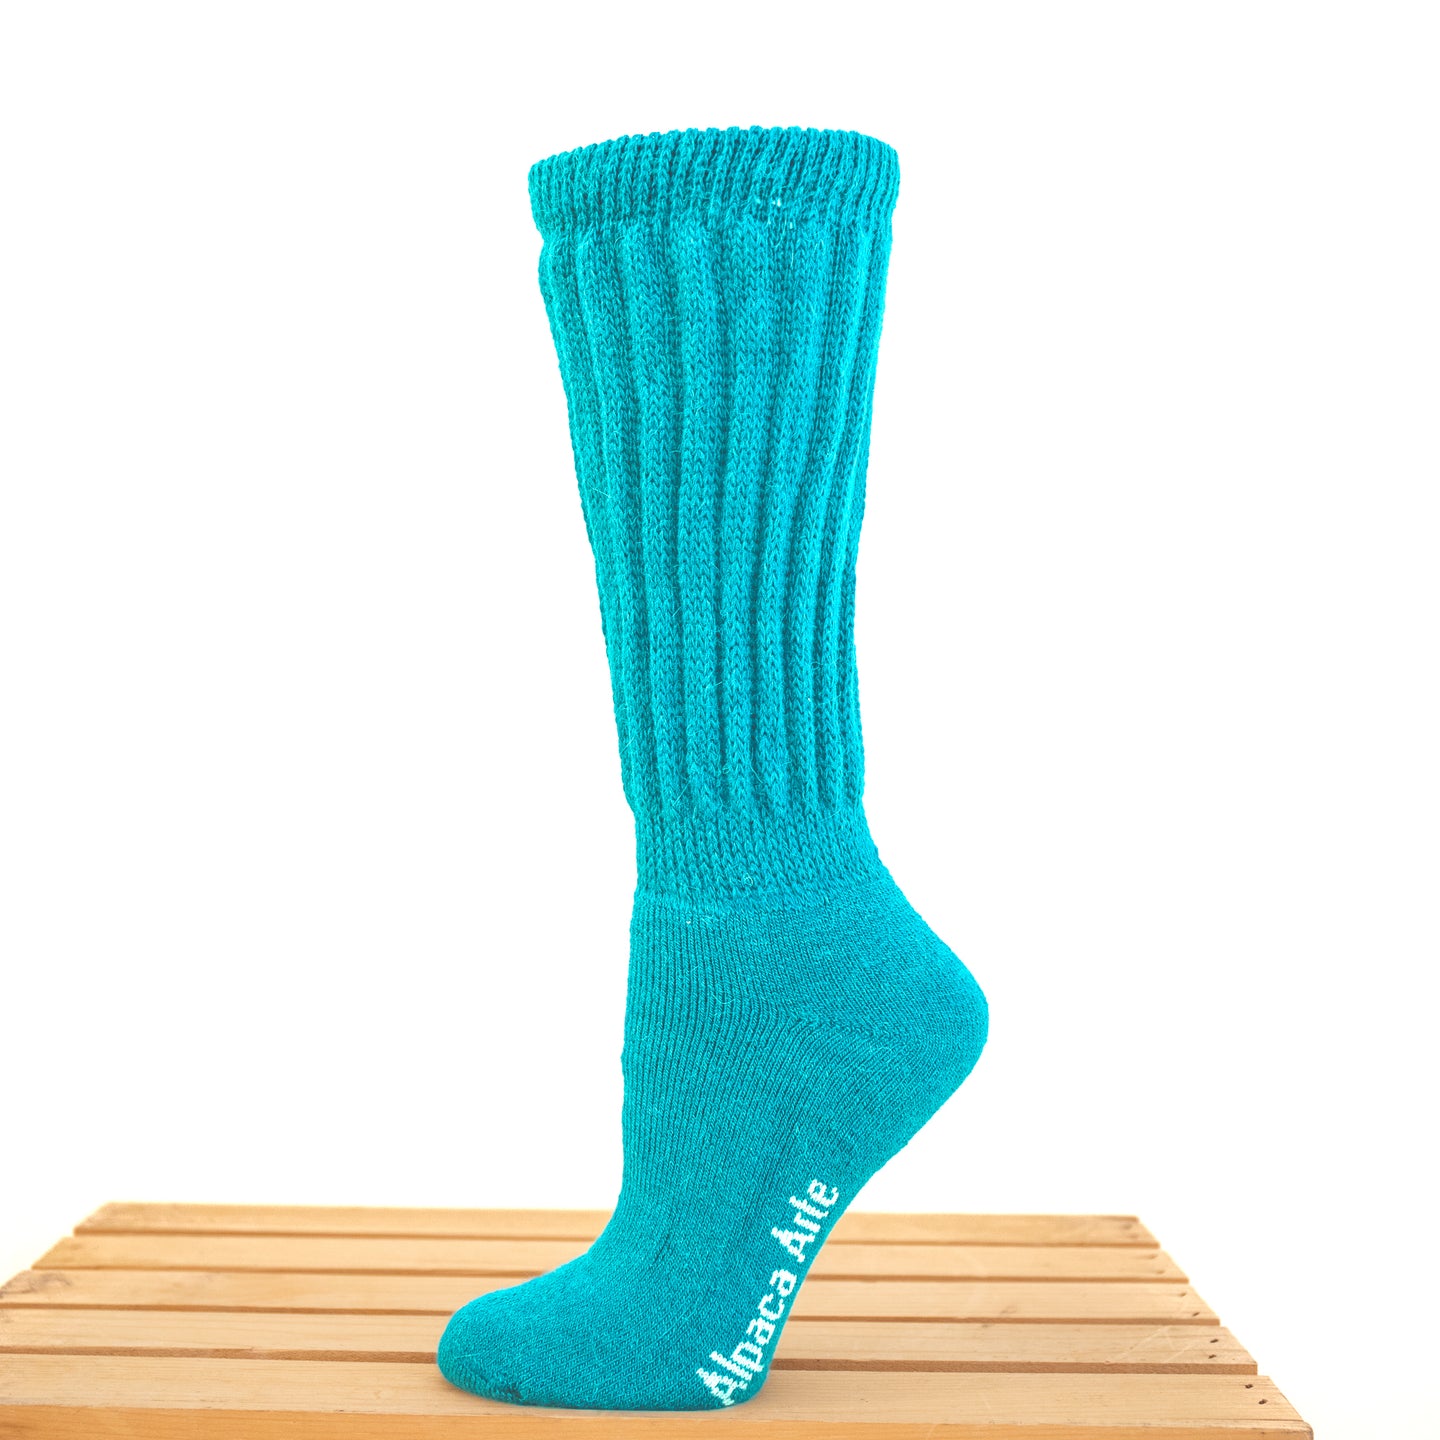 Why should alpaca socks be your first option?